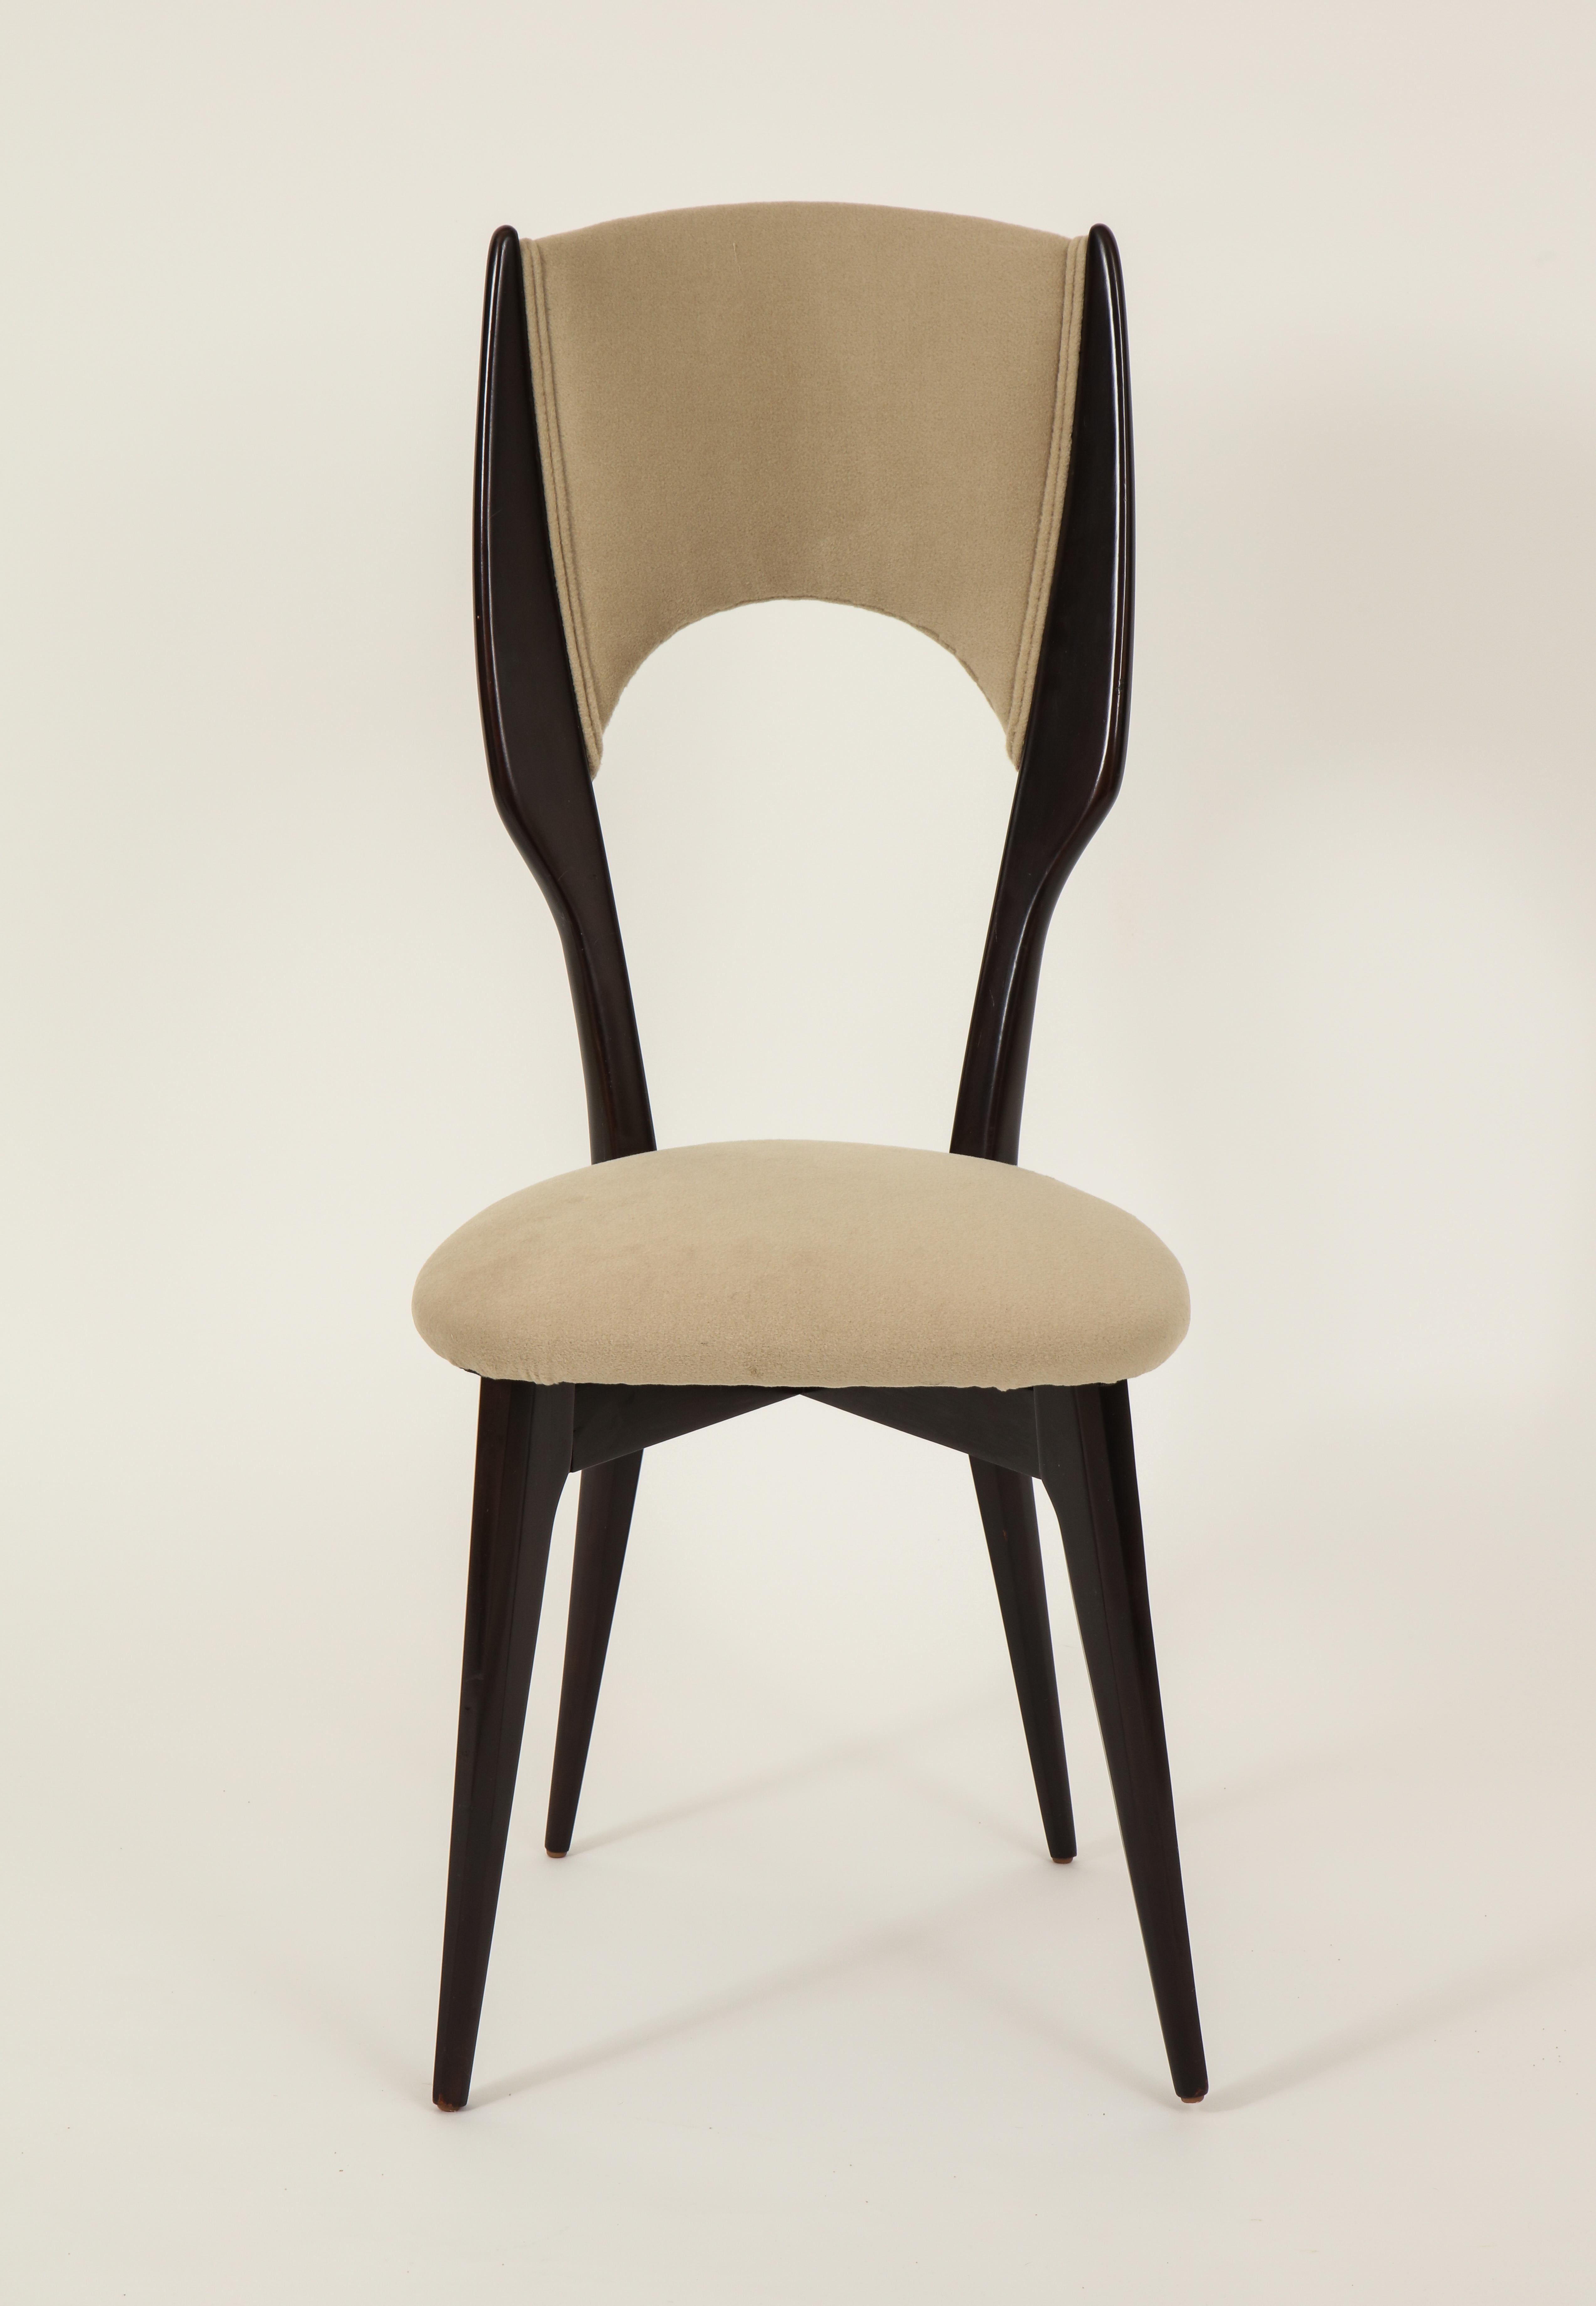 Six vintage Borsani style dining chairs beige cashmere fabric, Italy, 1950s.

Beautiful and sculptural Borsani style dining chairs with beige cashmere upholstery.